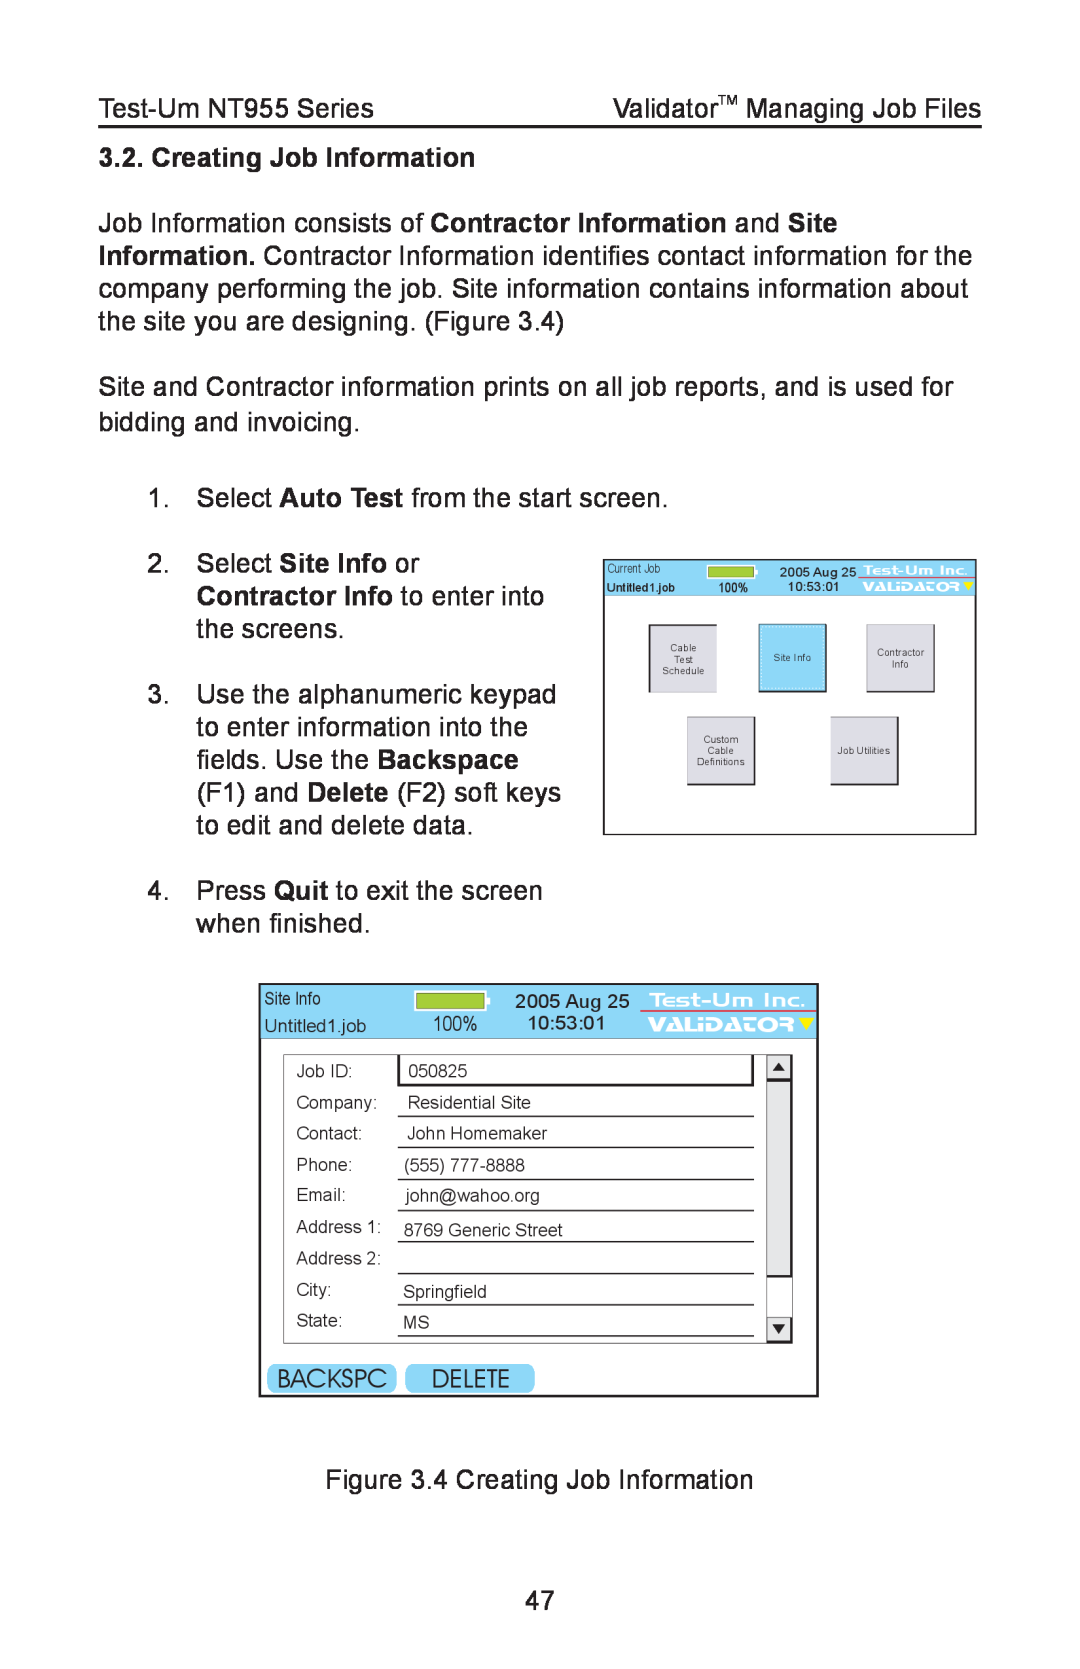 Test-Um NT955 operating instructions Creating Job Information, Contractor Info to enter into, Backspc, Delete 